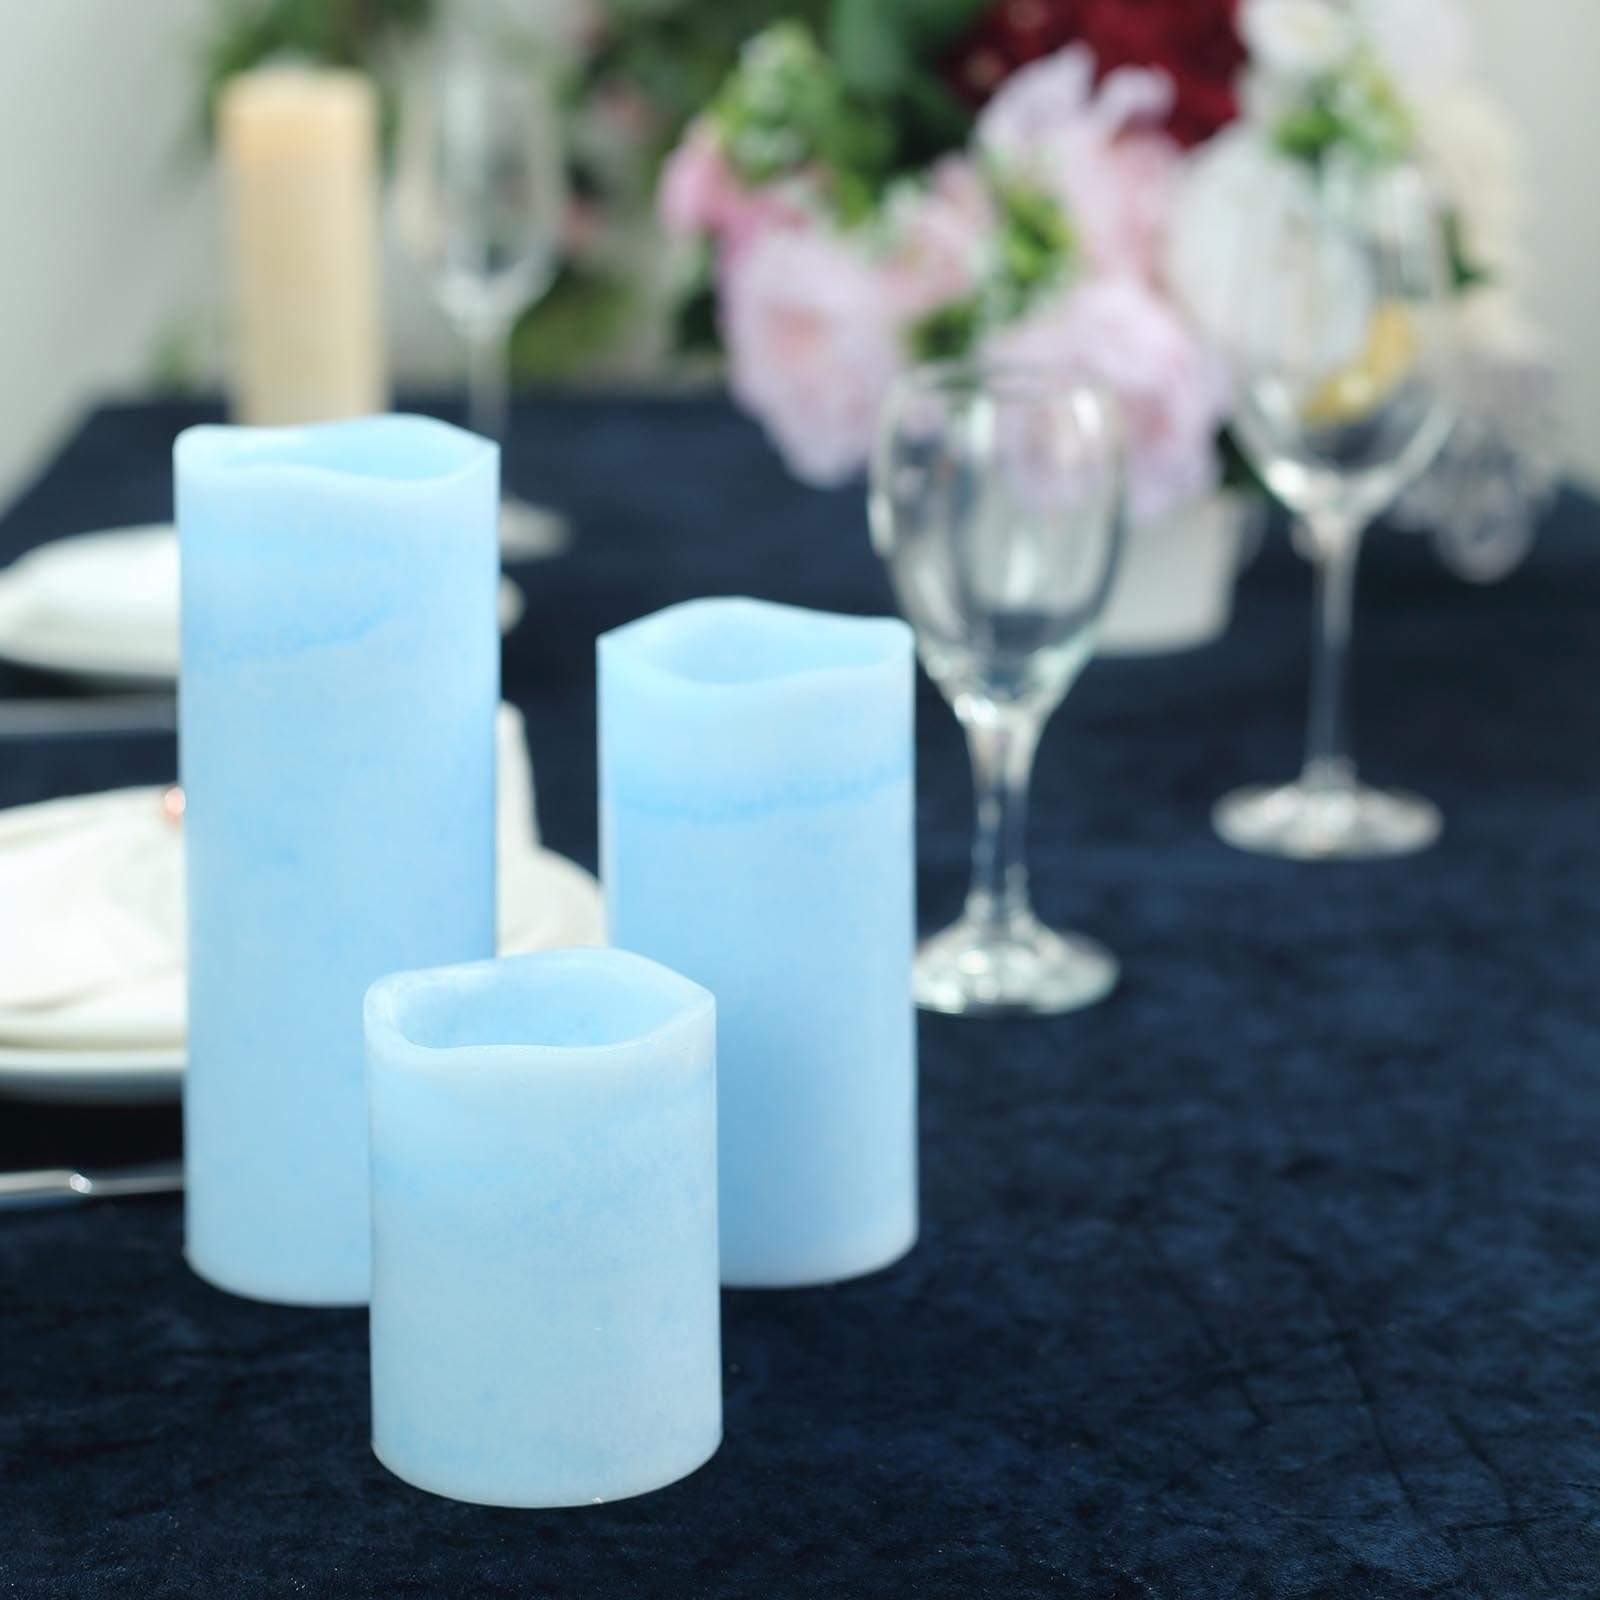 3 pcs LED Pillar Candles Lights with Remote Control